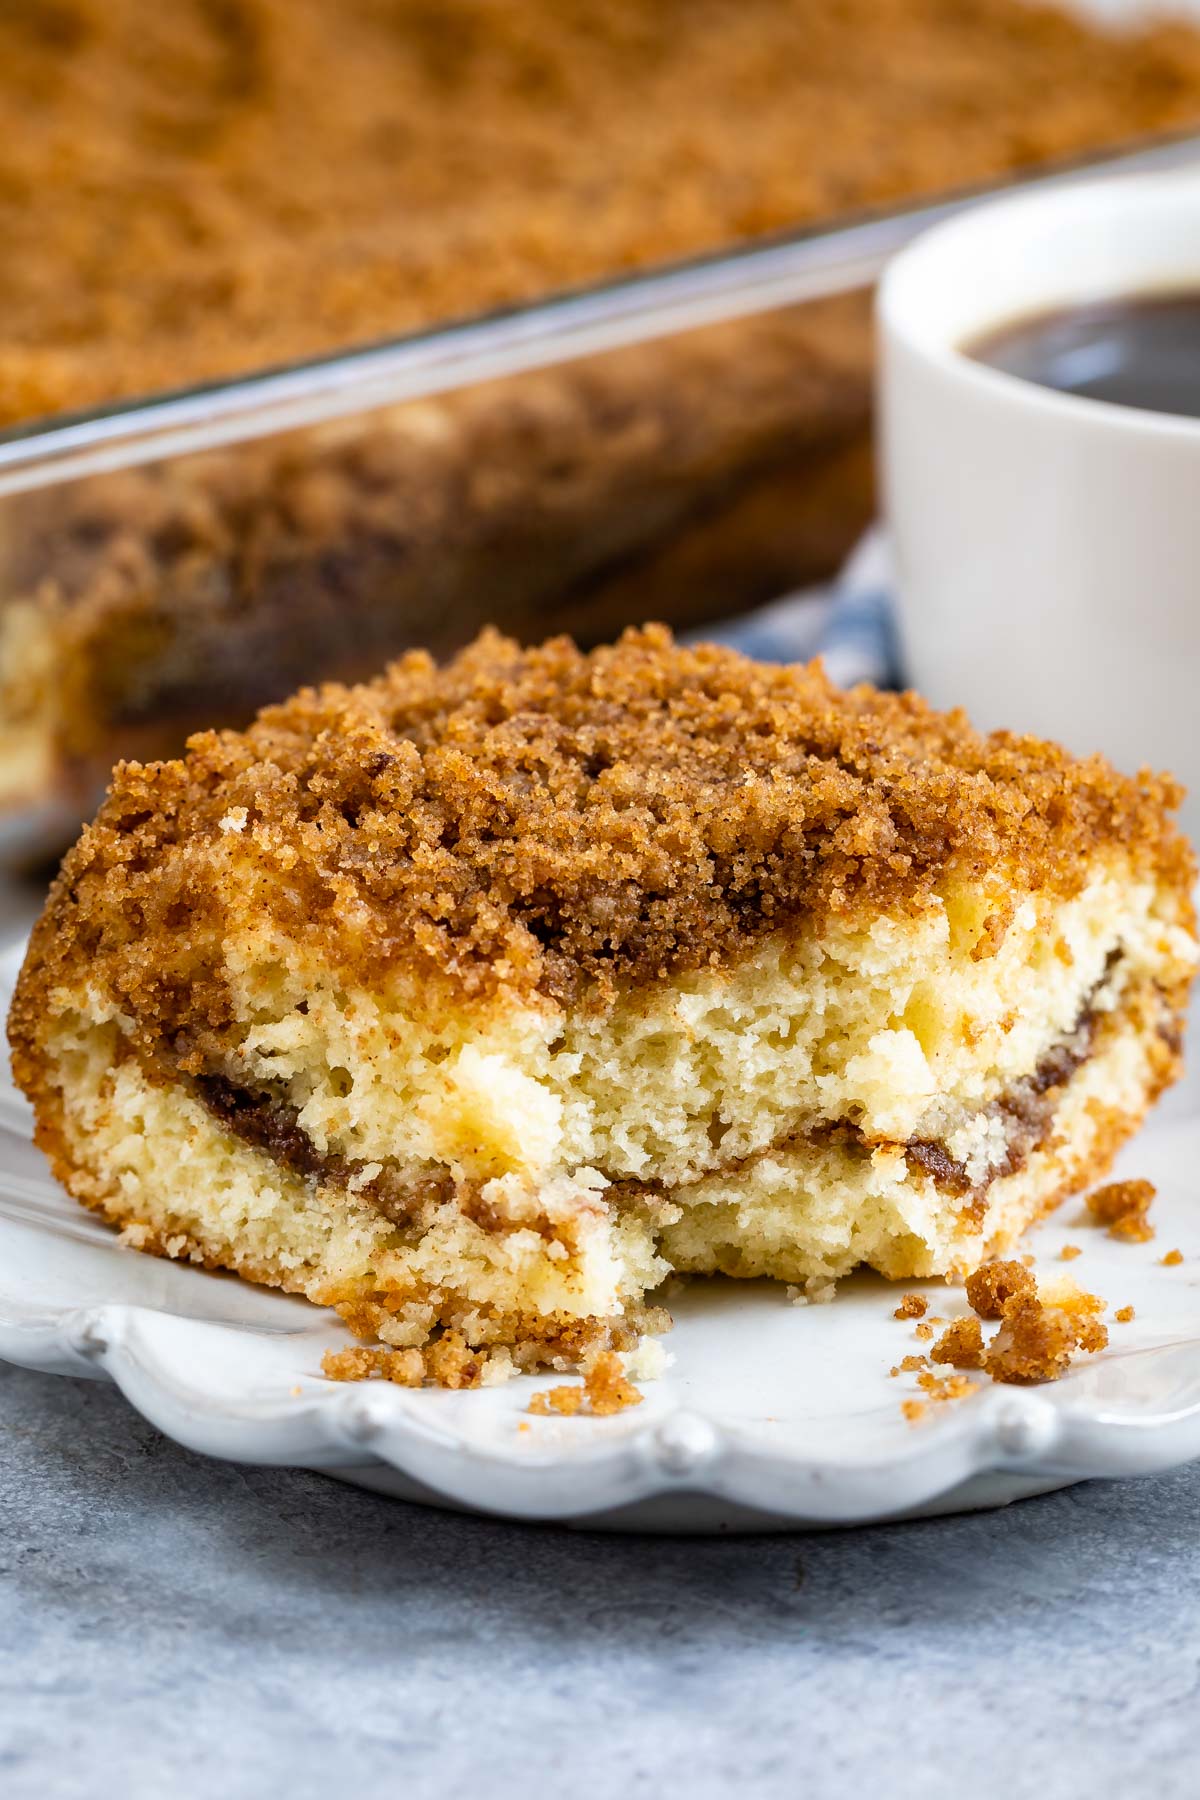 One piece of streusel coffee cake on a plate with corner piece missing